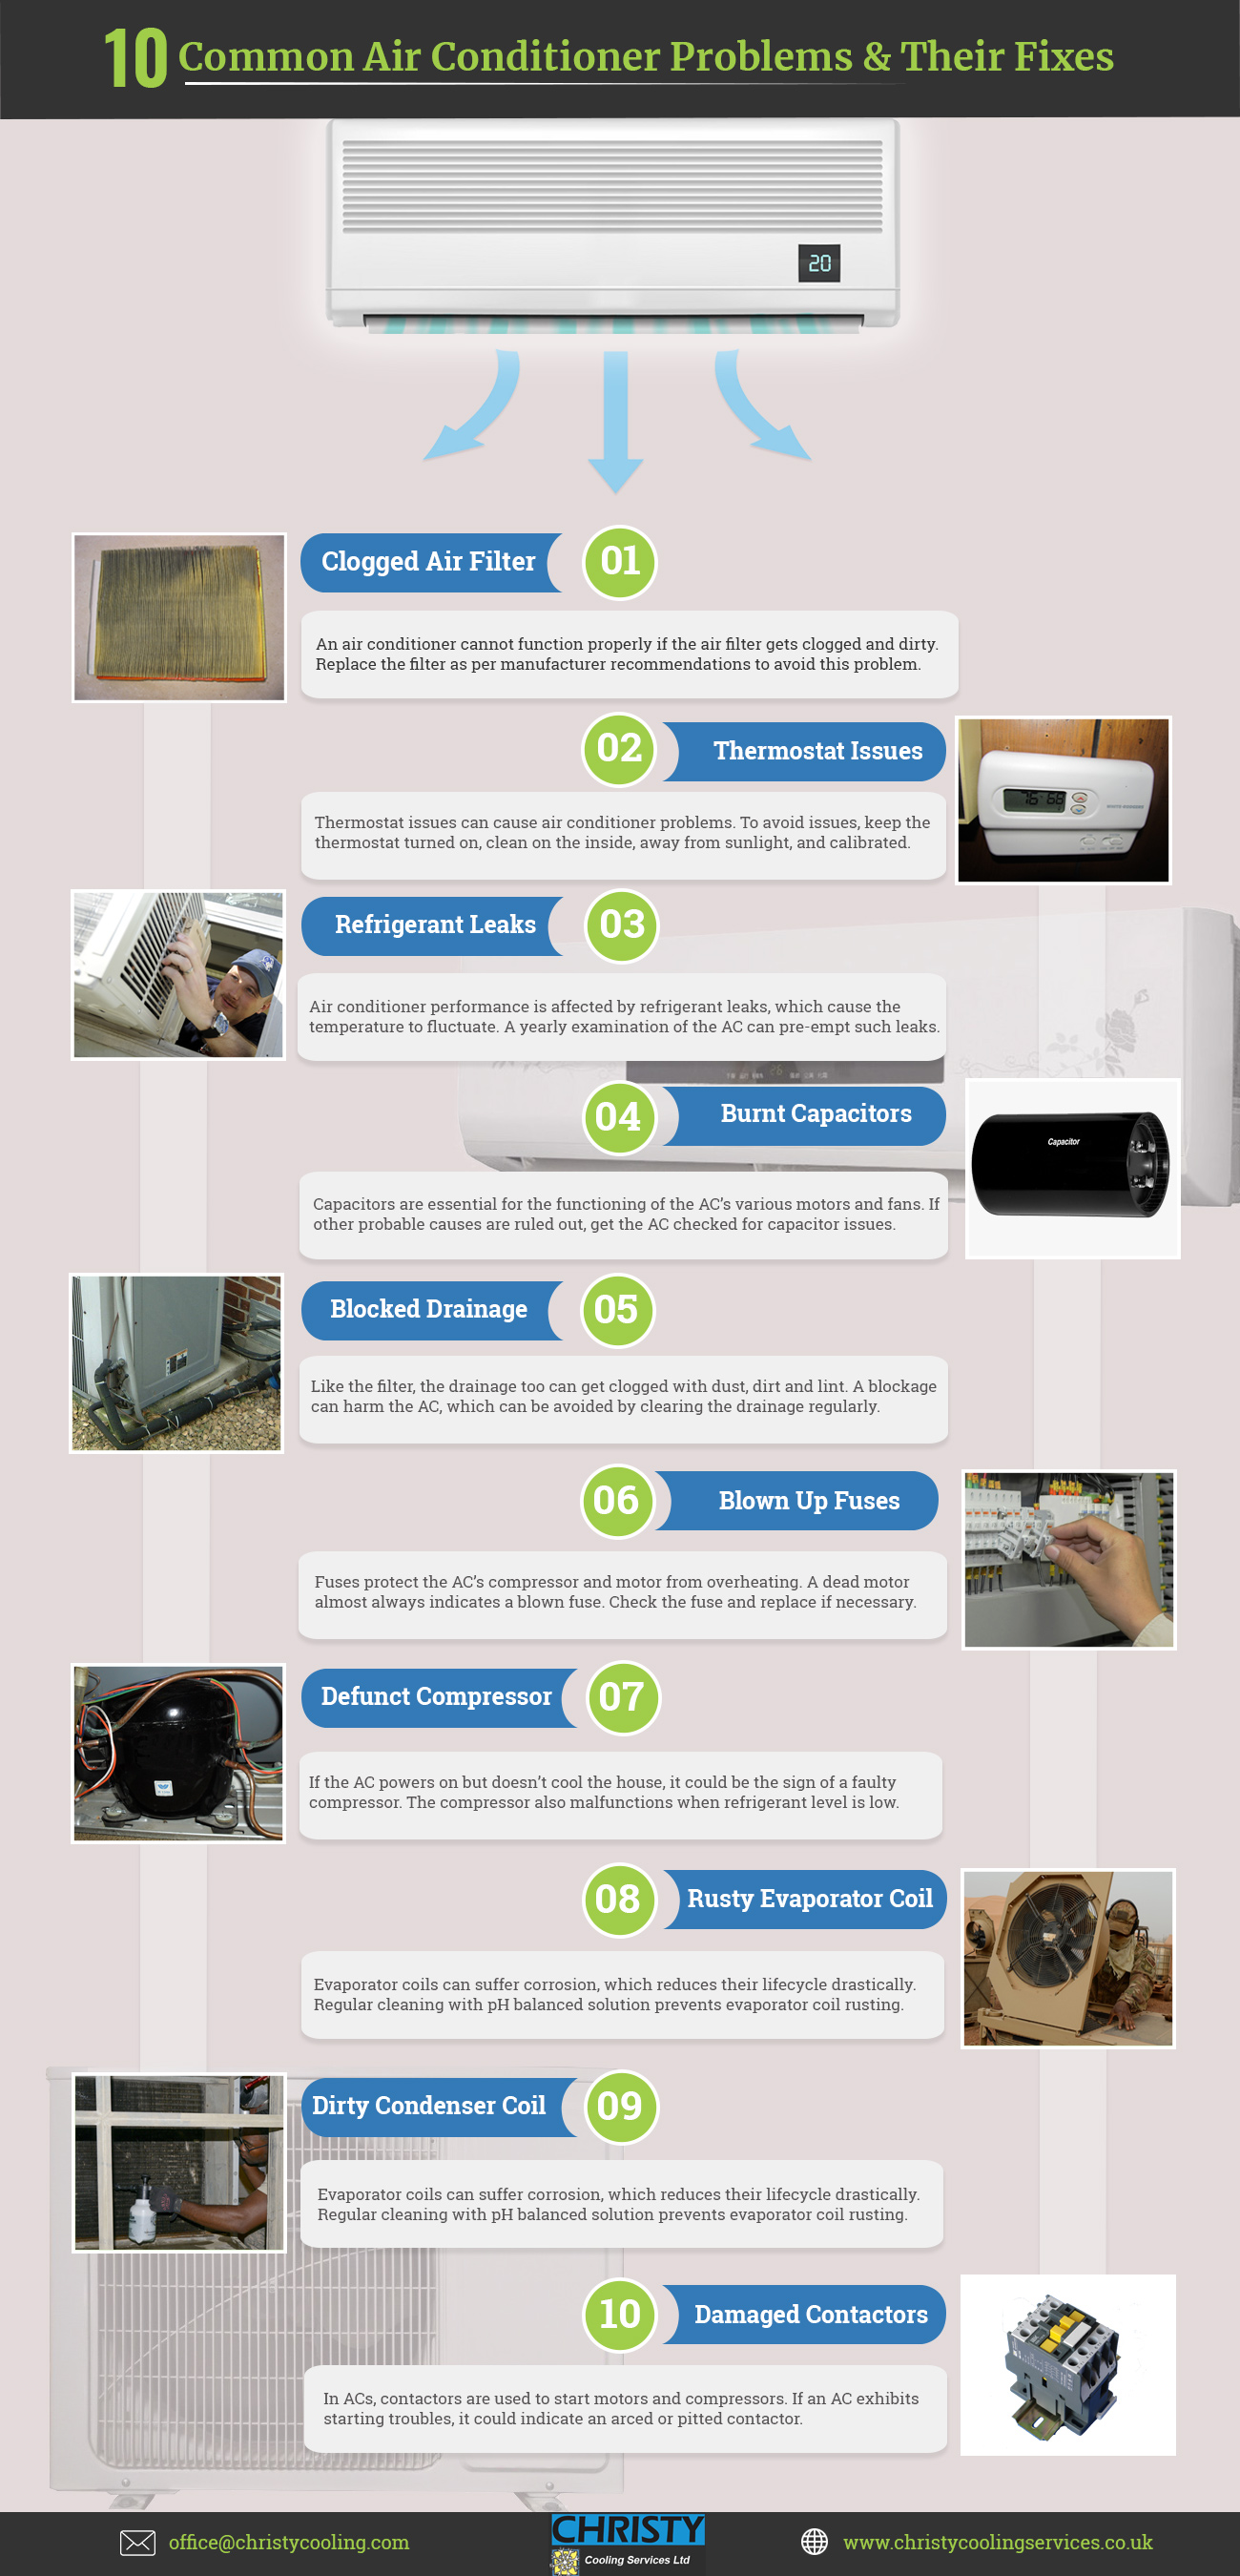 10 Common Air Conditioner Problems & Their Fixes | AC Troubleshooting Guide